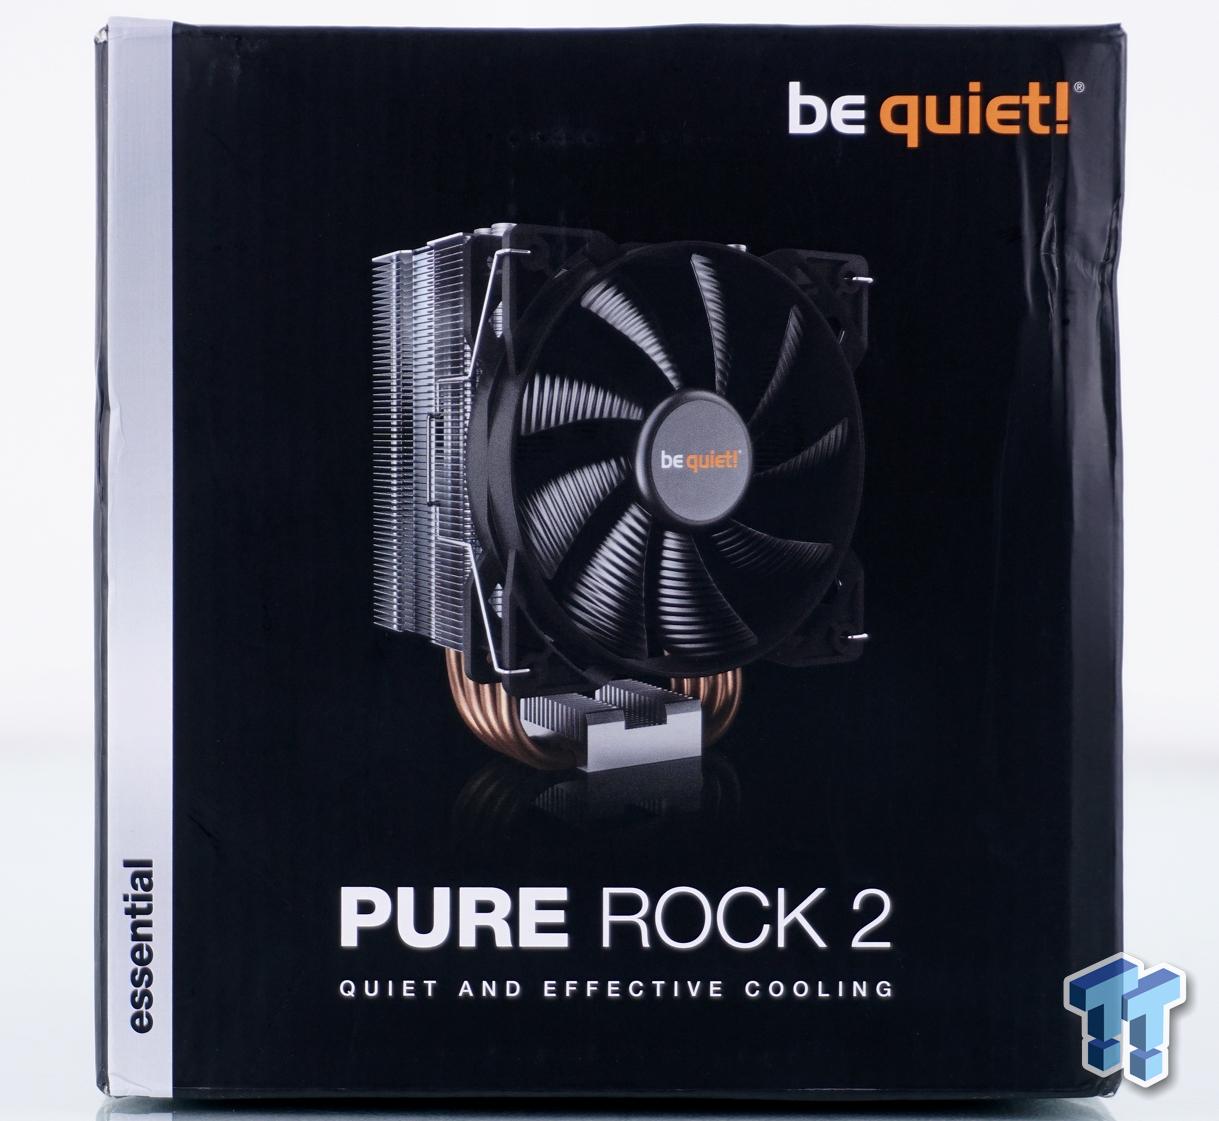 be quiet! Pure Rock 2 Review - Silent with Good Performance